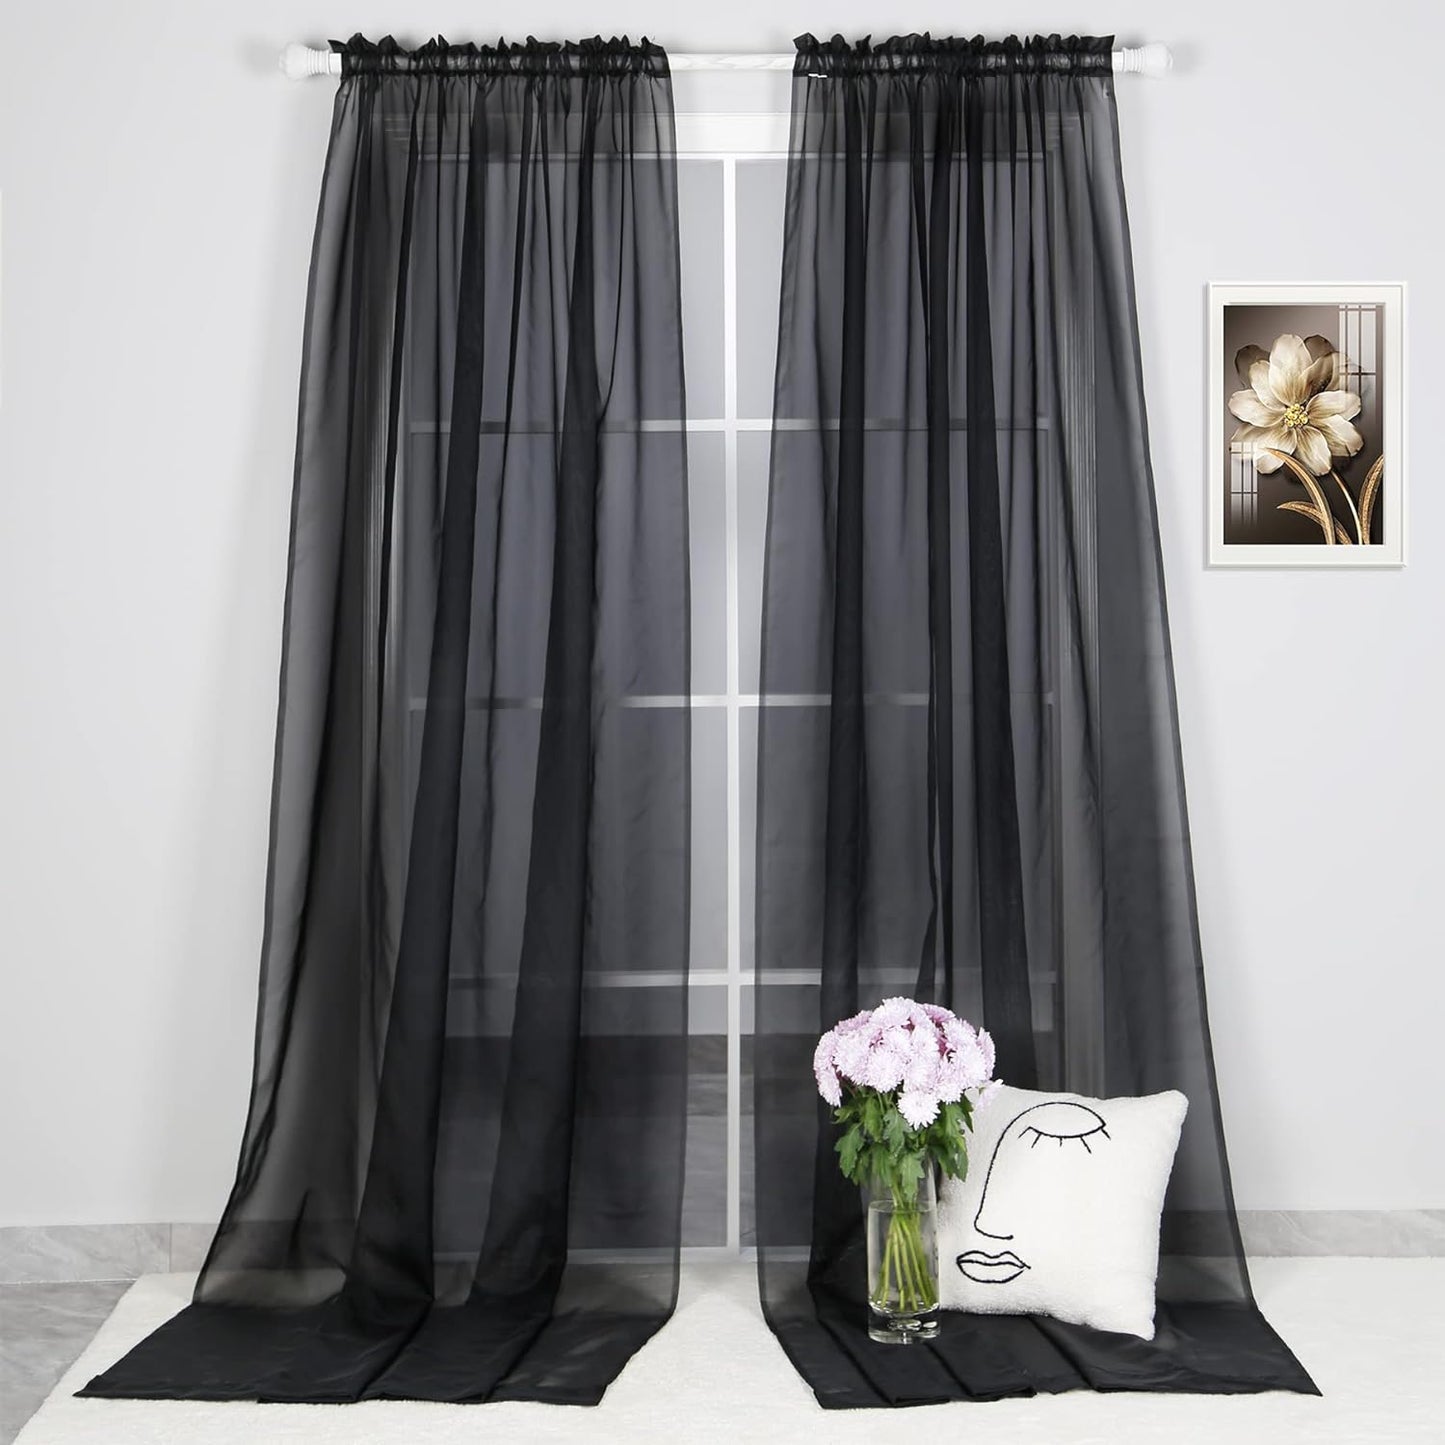 Dulcidee White Sheer Curtains 84 Inches Long 2 Panels Set - Lightweight and Light Filtering Elegant Rod Pocket Voile Window Sheer White Drapes for Bedroom/Living Room,2Pcs  DULCIDEE Black 59W X 120L | 2 Panels 